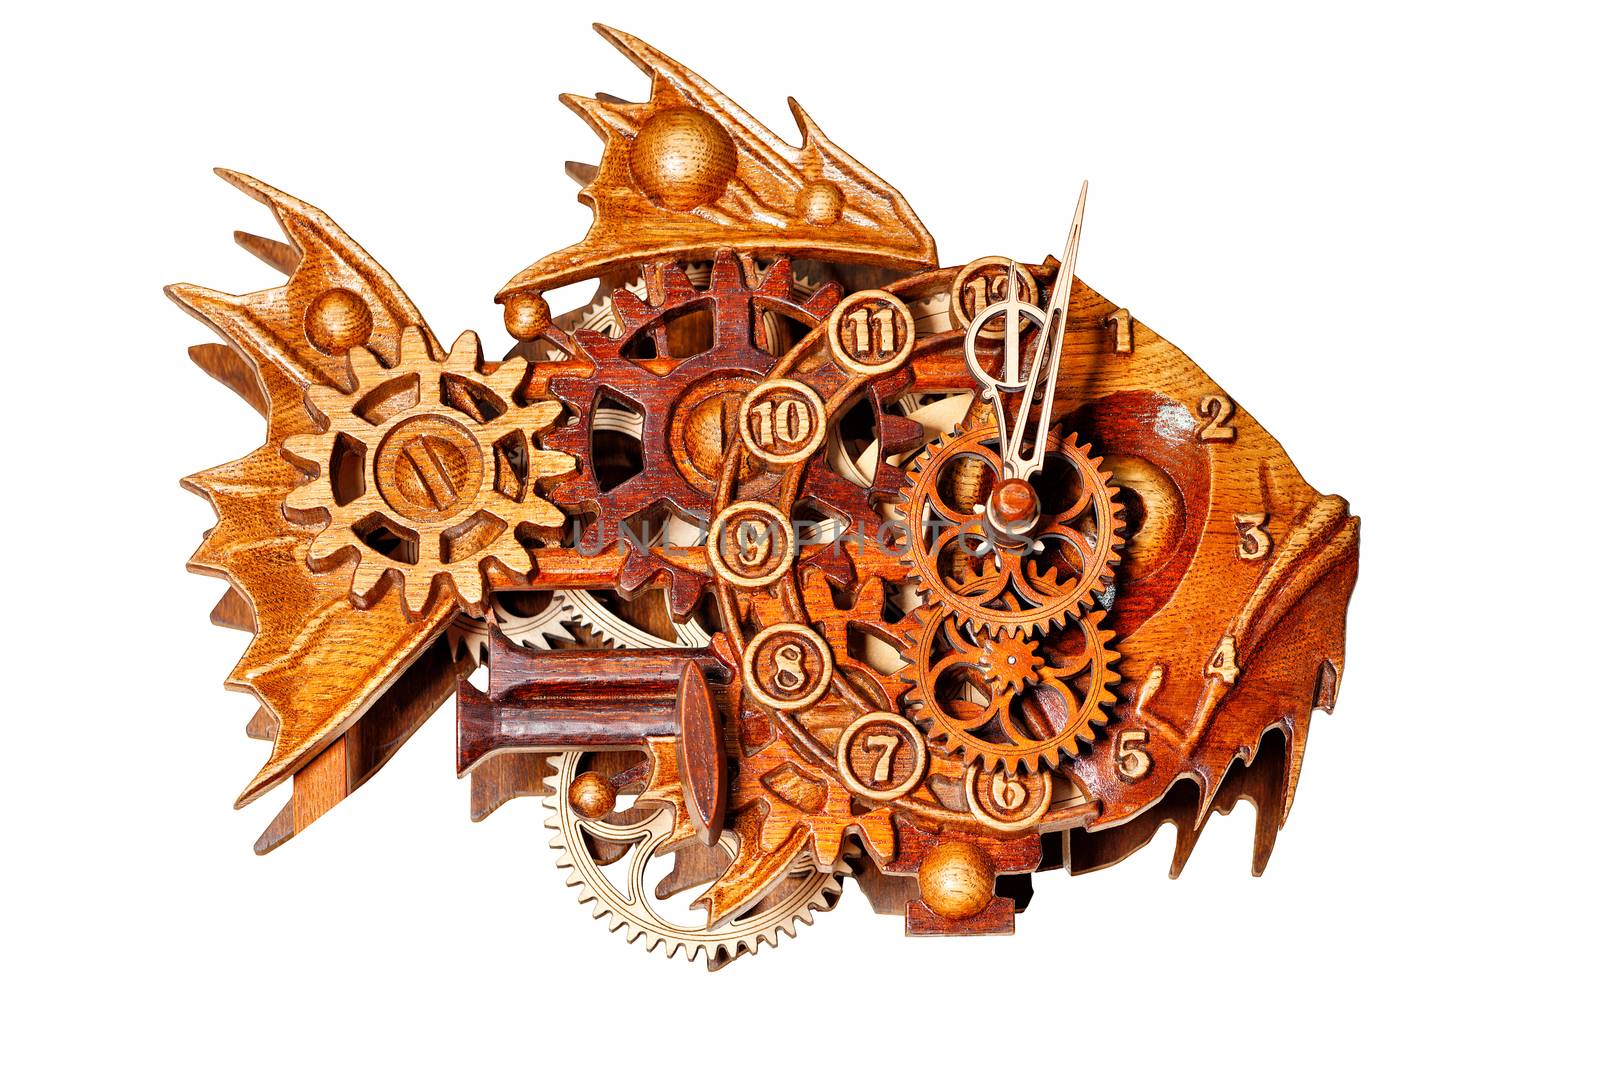 Beautiful and unusual wooden wall clock made of wooden parts on the dial in the form of a predatory fish with carved elements. Image isolated on white background.